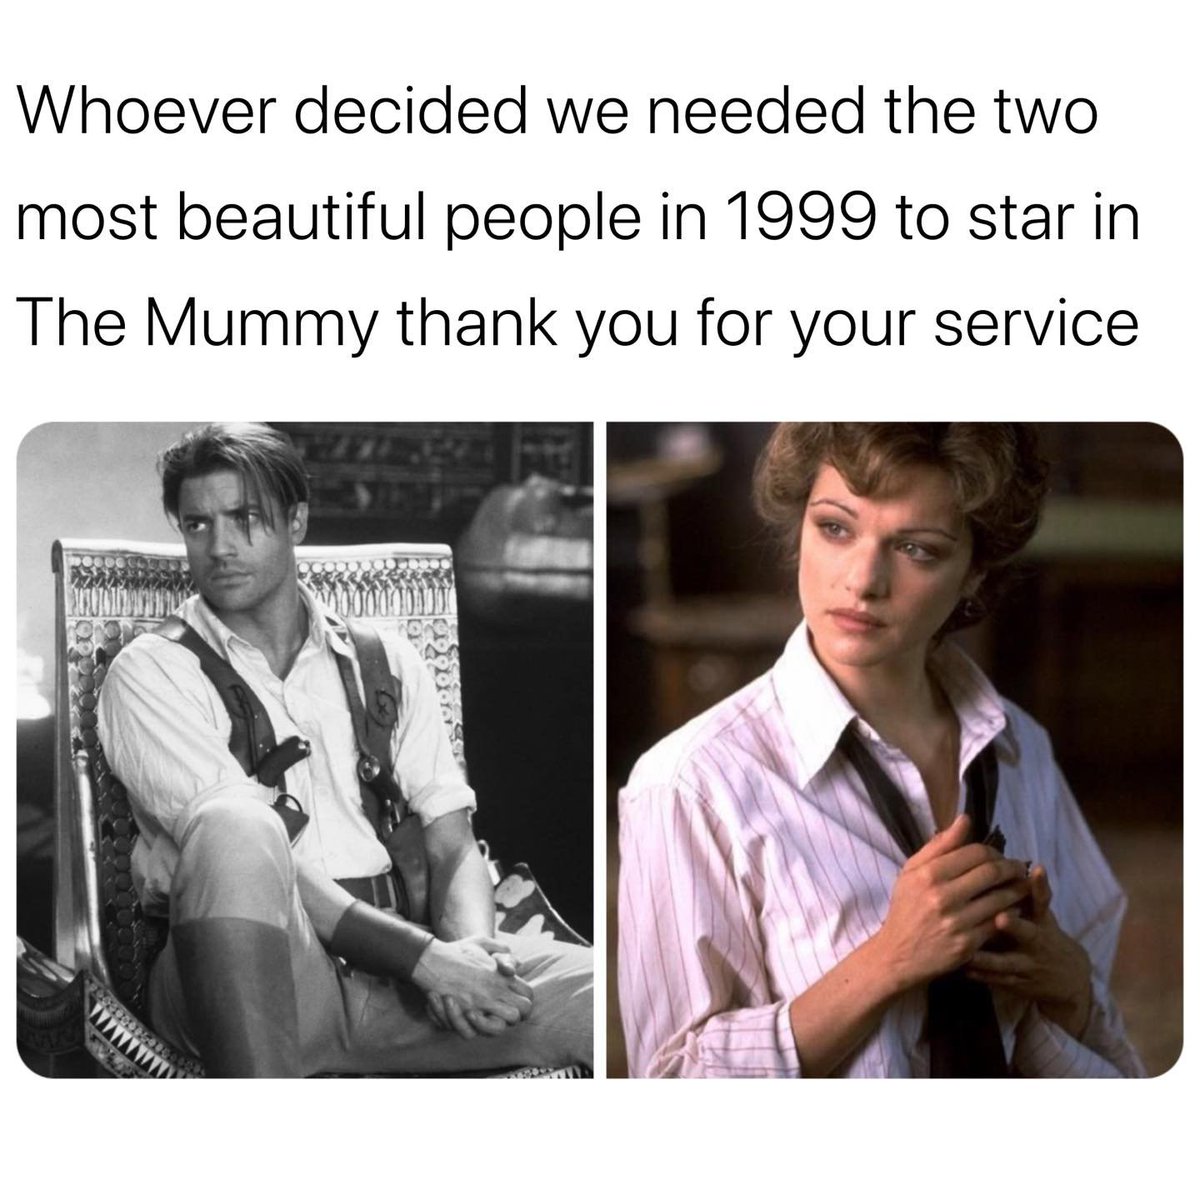 Well yeah . . . even as a straight male I gotta admit Brendan Fraser is damn great lookin . . . From my standpoint not as great as Rachel Weisz but still XD